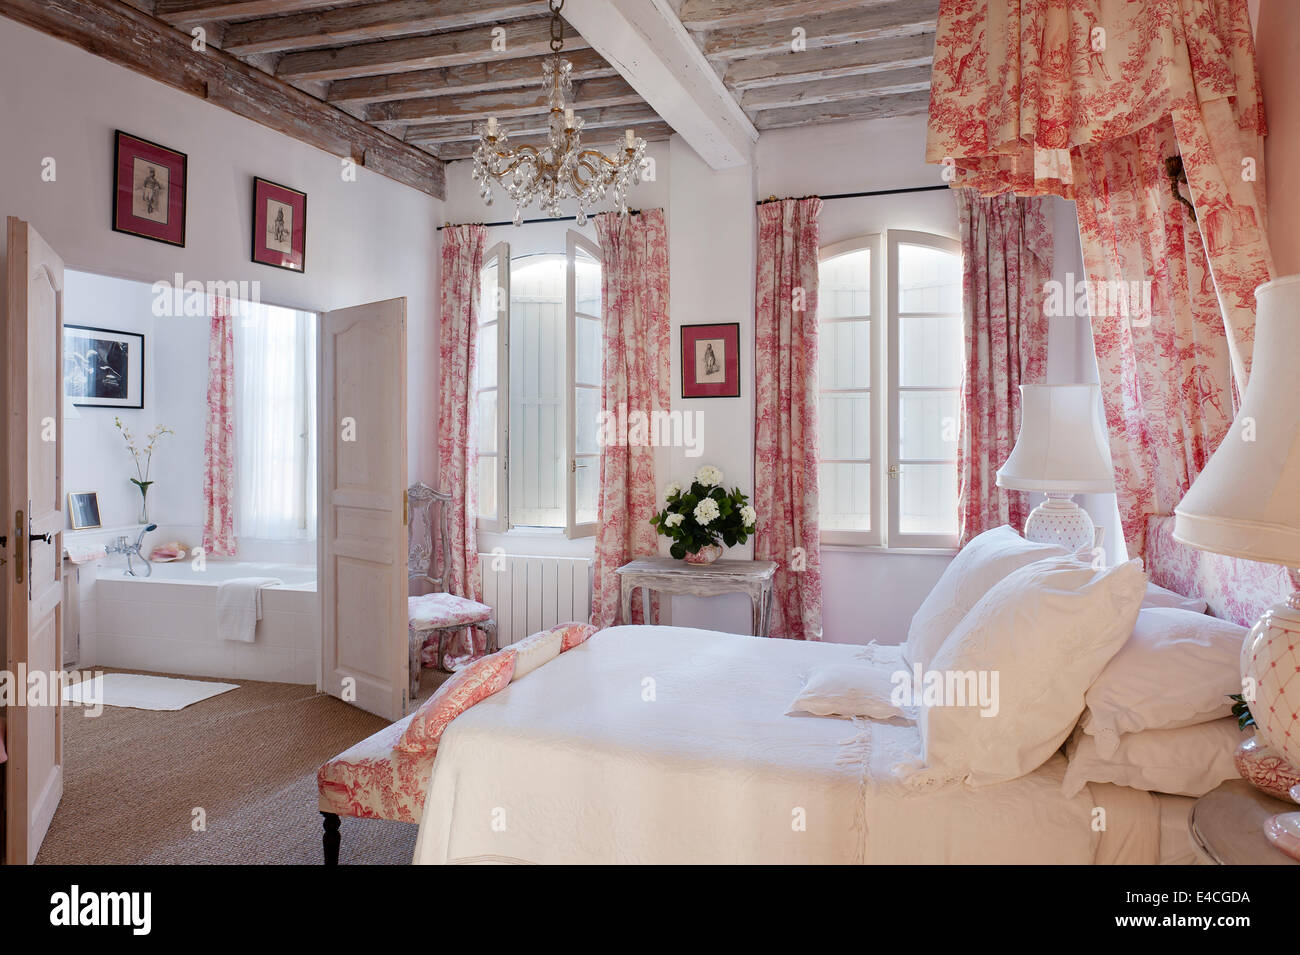 Pink and white toile de jouy fabric on cushions, curtain and bed coronet canopy in bedroom with wooden ceiling beams and bedside Stock Photo